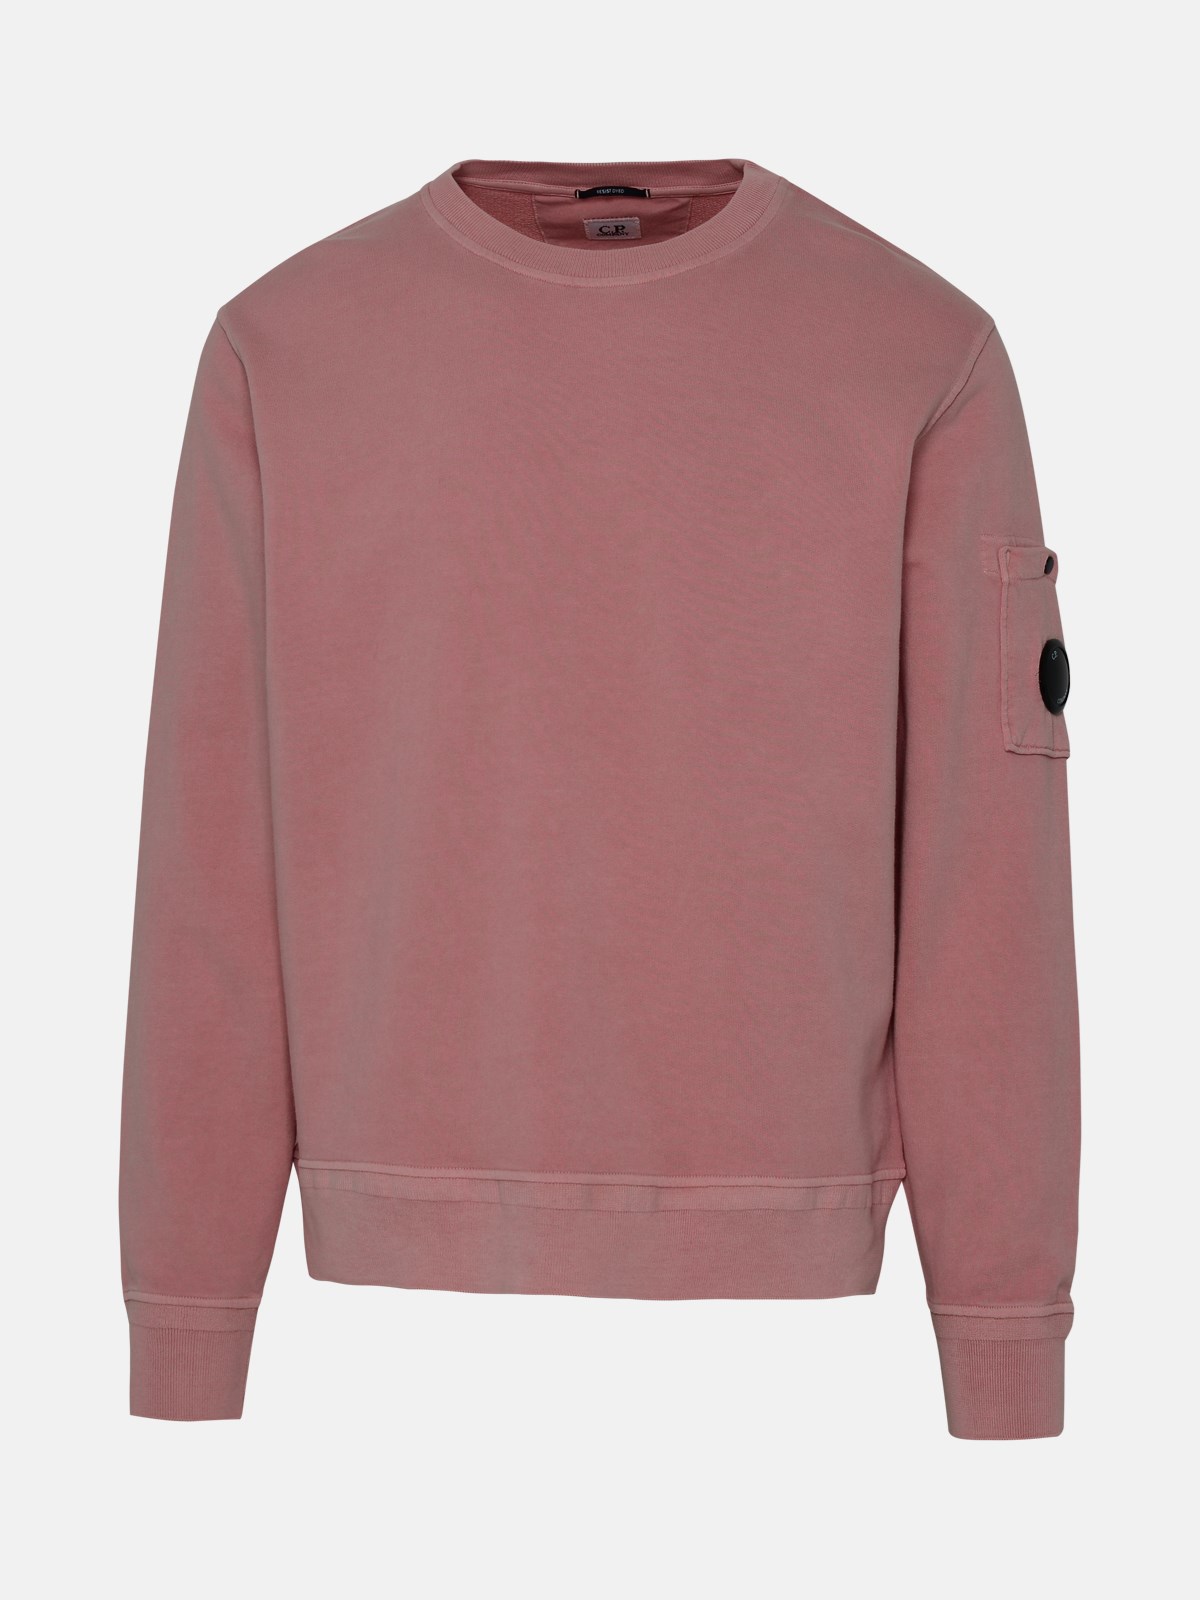 C.p. Company Old Rose Cotton Sweatshirt In Pink